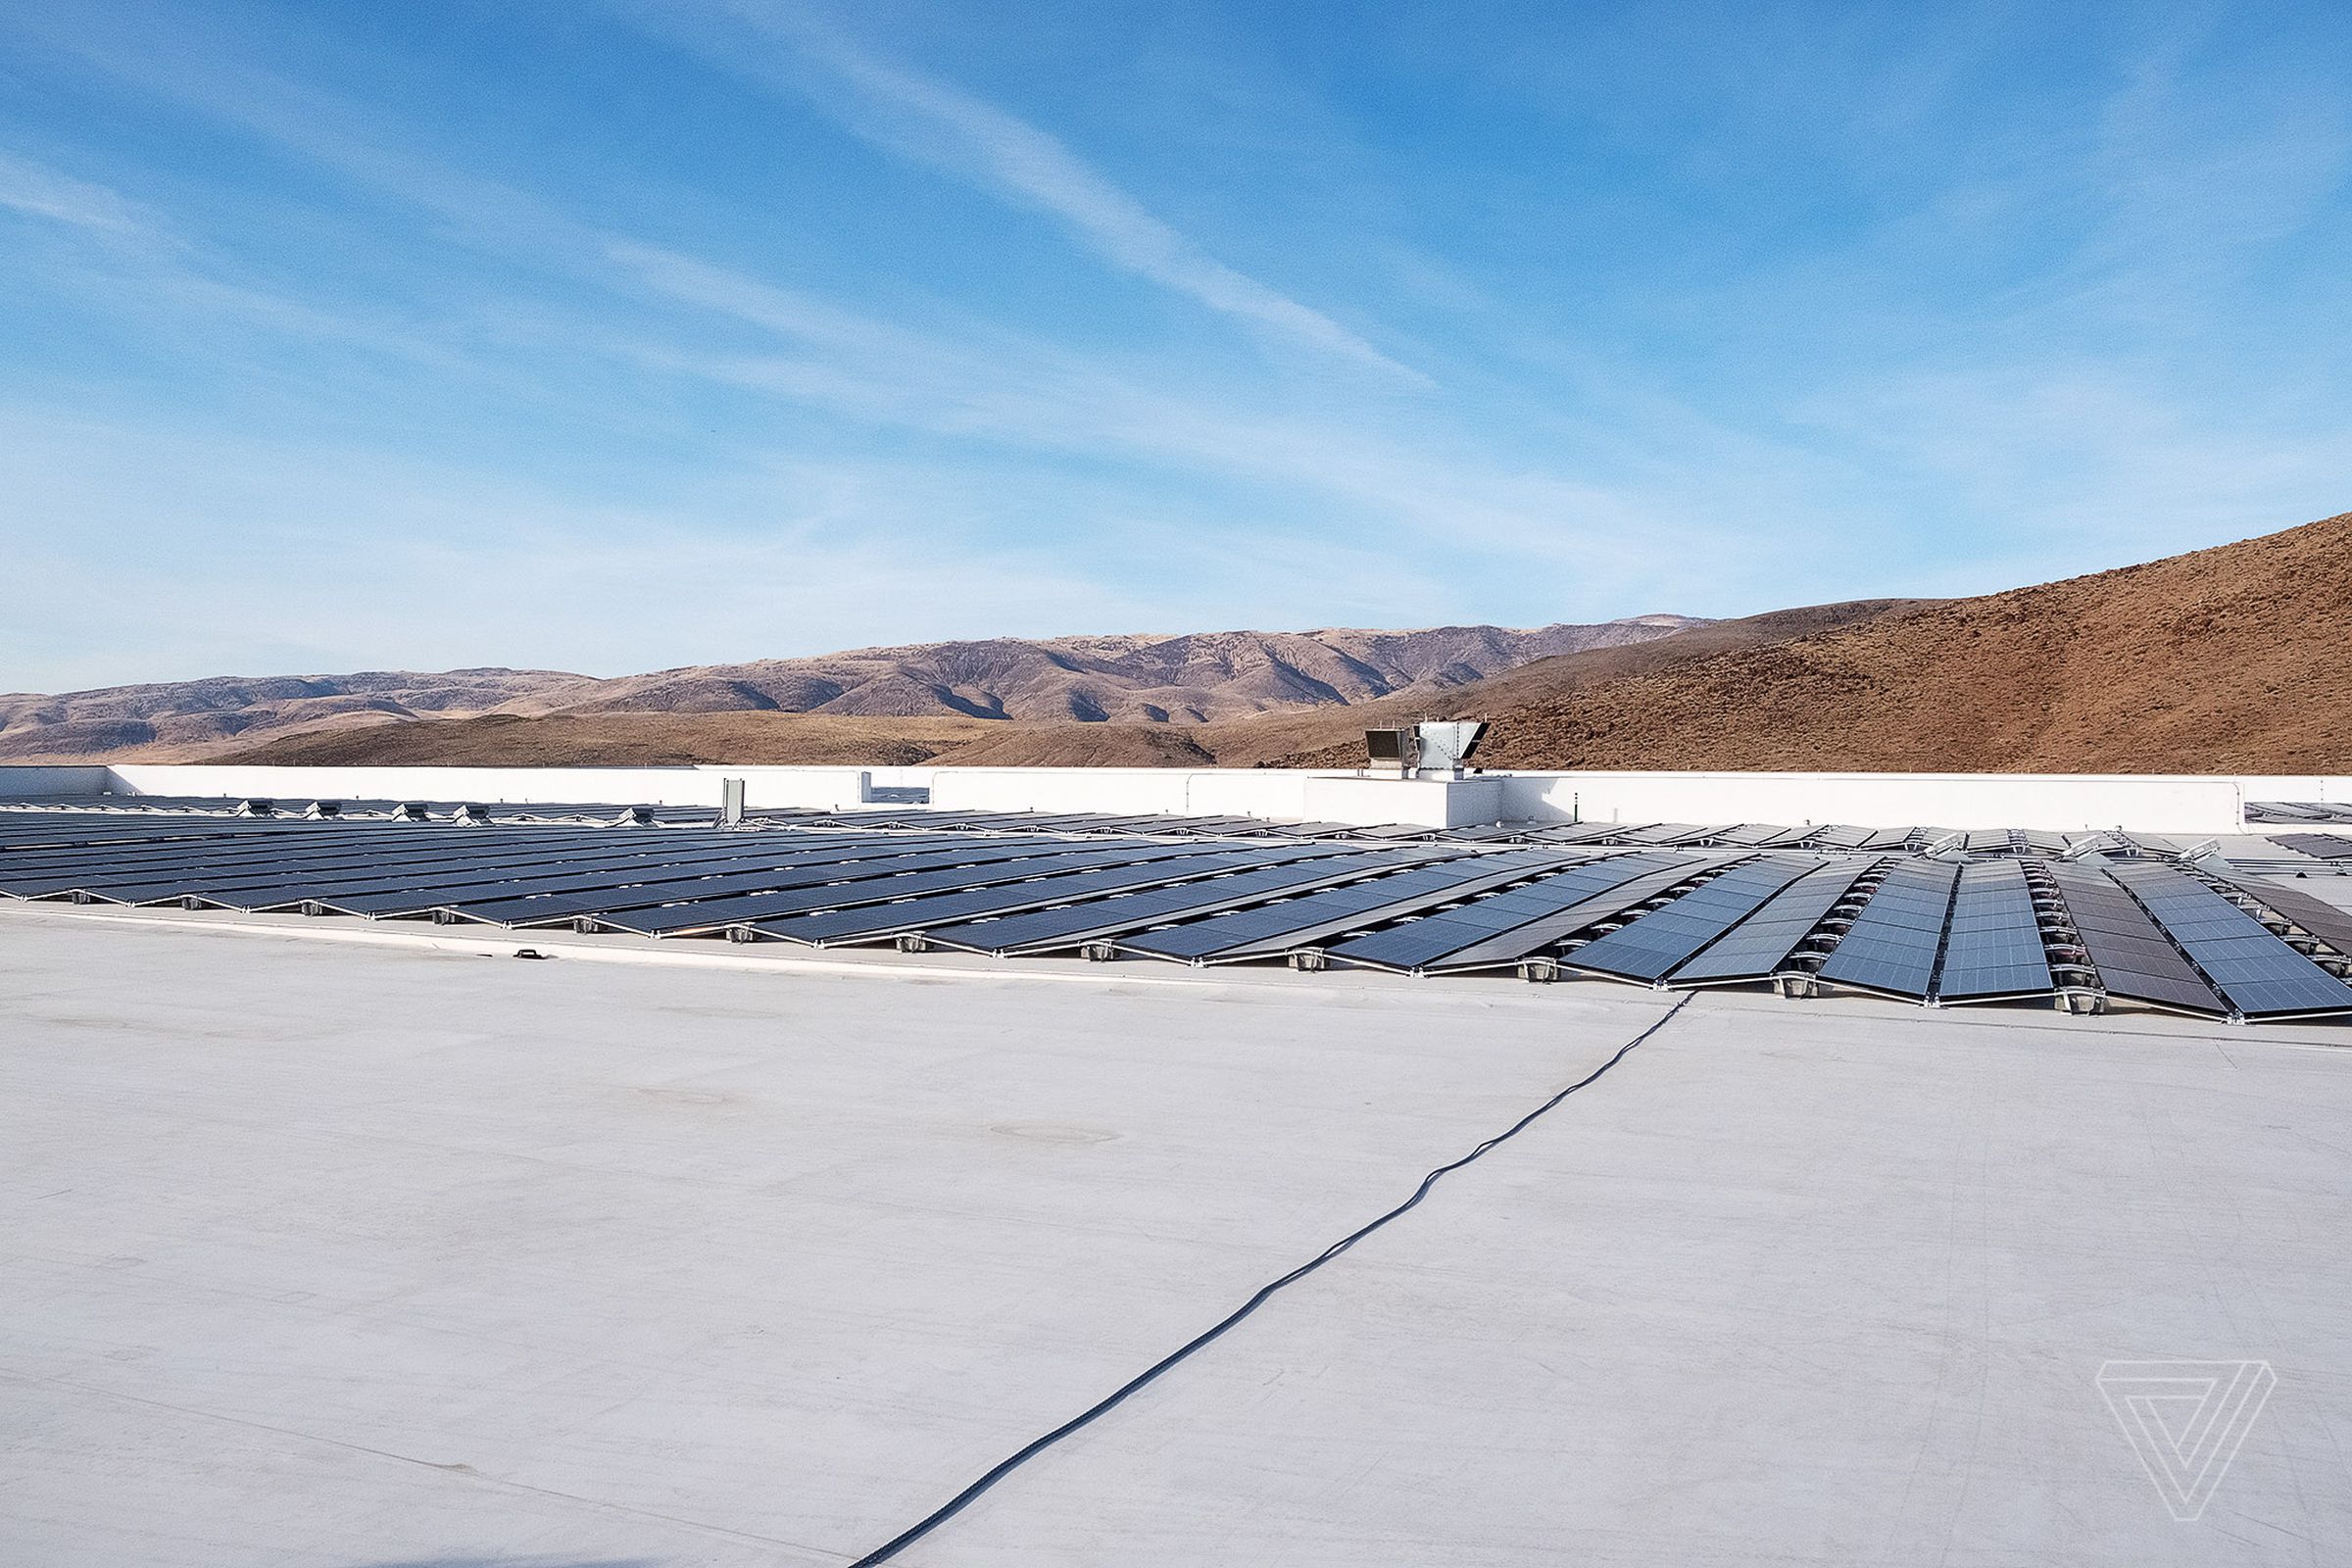 Solar panels on the roof of the Gigafactory. Tesla aims to cover the entire top of the facility with solar panels in order to someday operate off the grid.